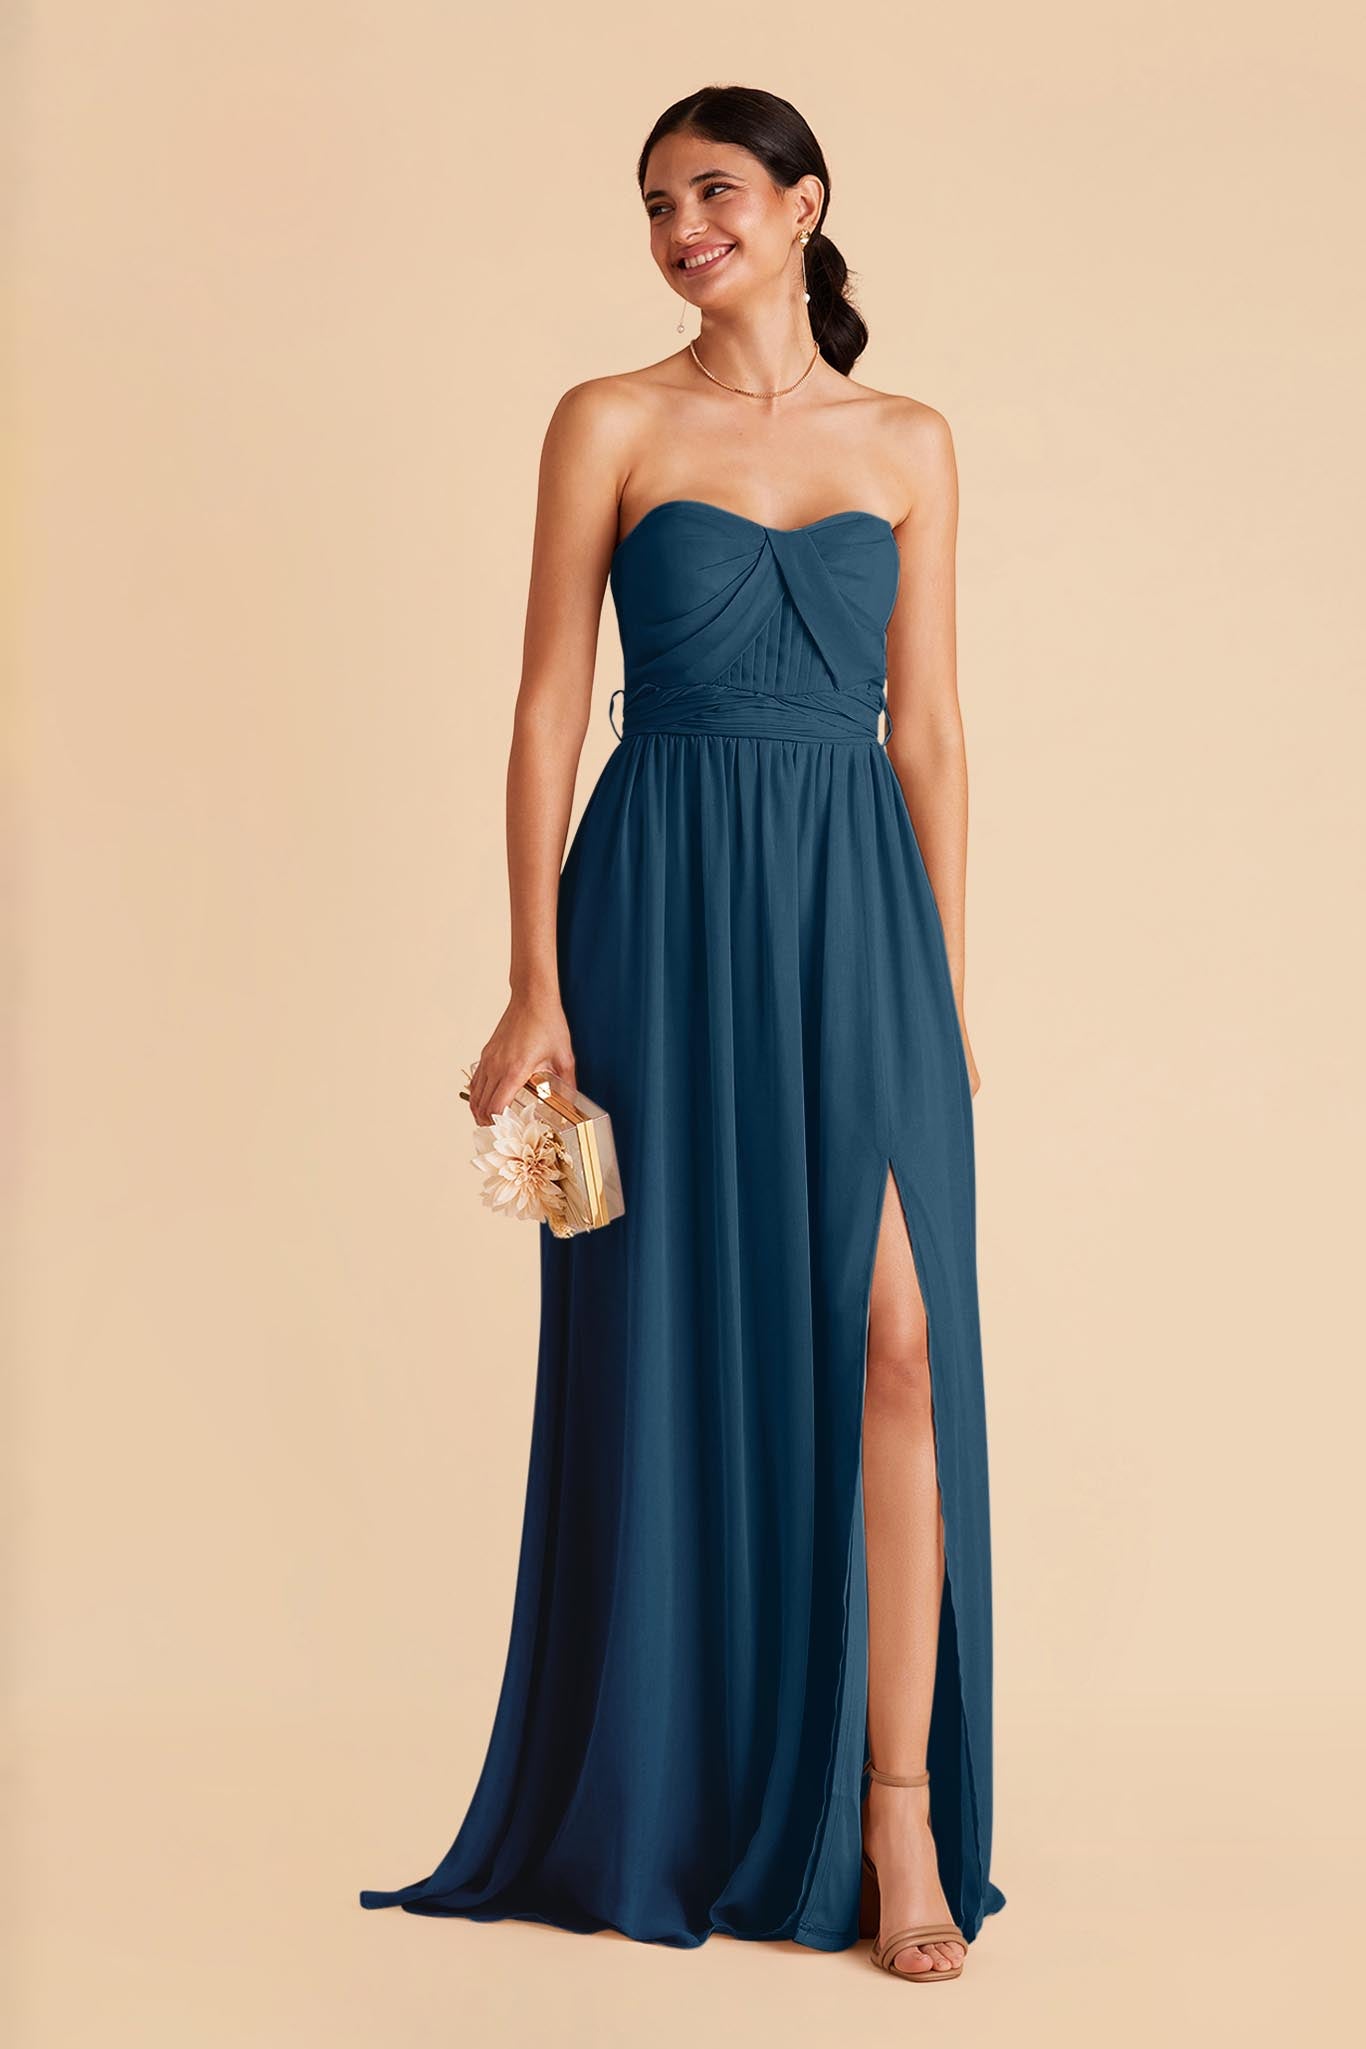 Convertible Bridesmaid Dress Stretchable Woven Dress Pleated Prom Dress  Multiway Dress 20860-Blue - Blue / US2